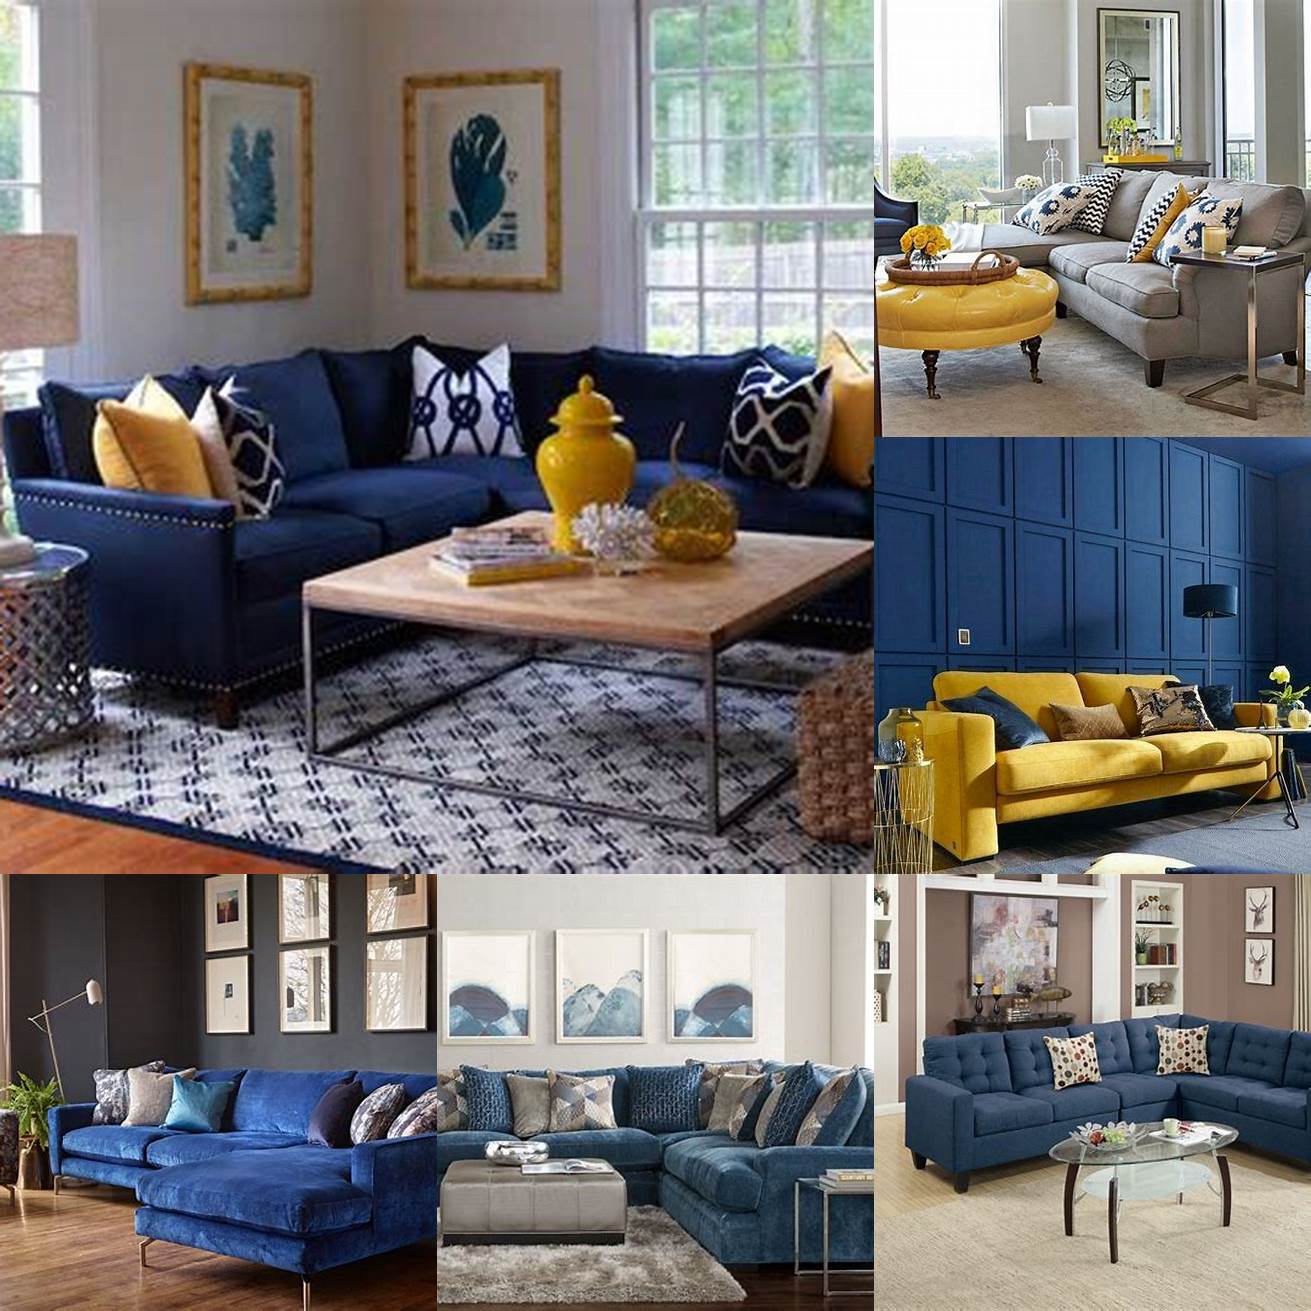 A yellow sectional sofa paired with a navy blue wall and gold accents